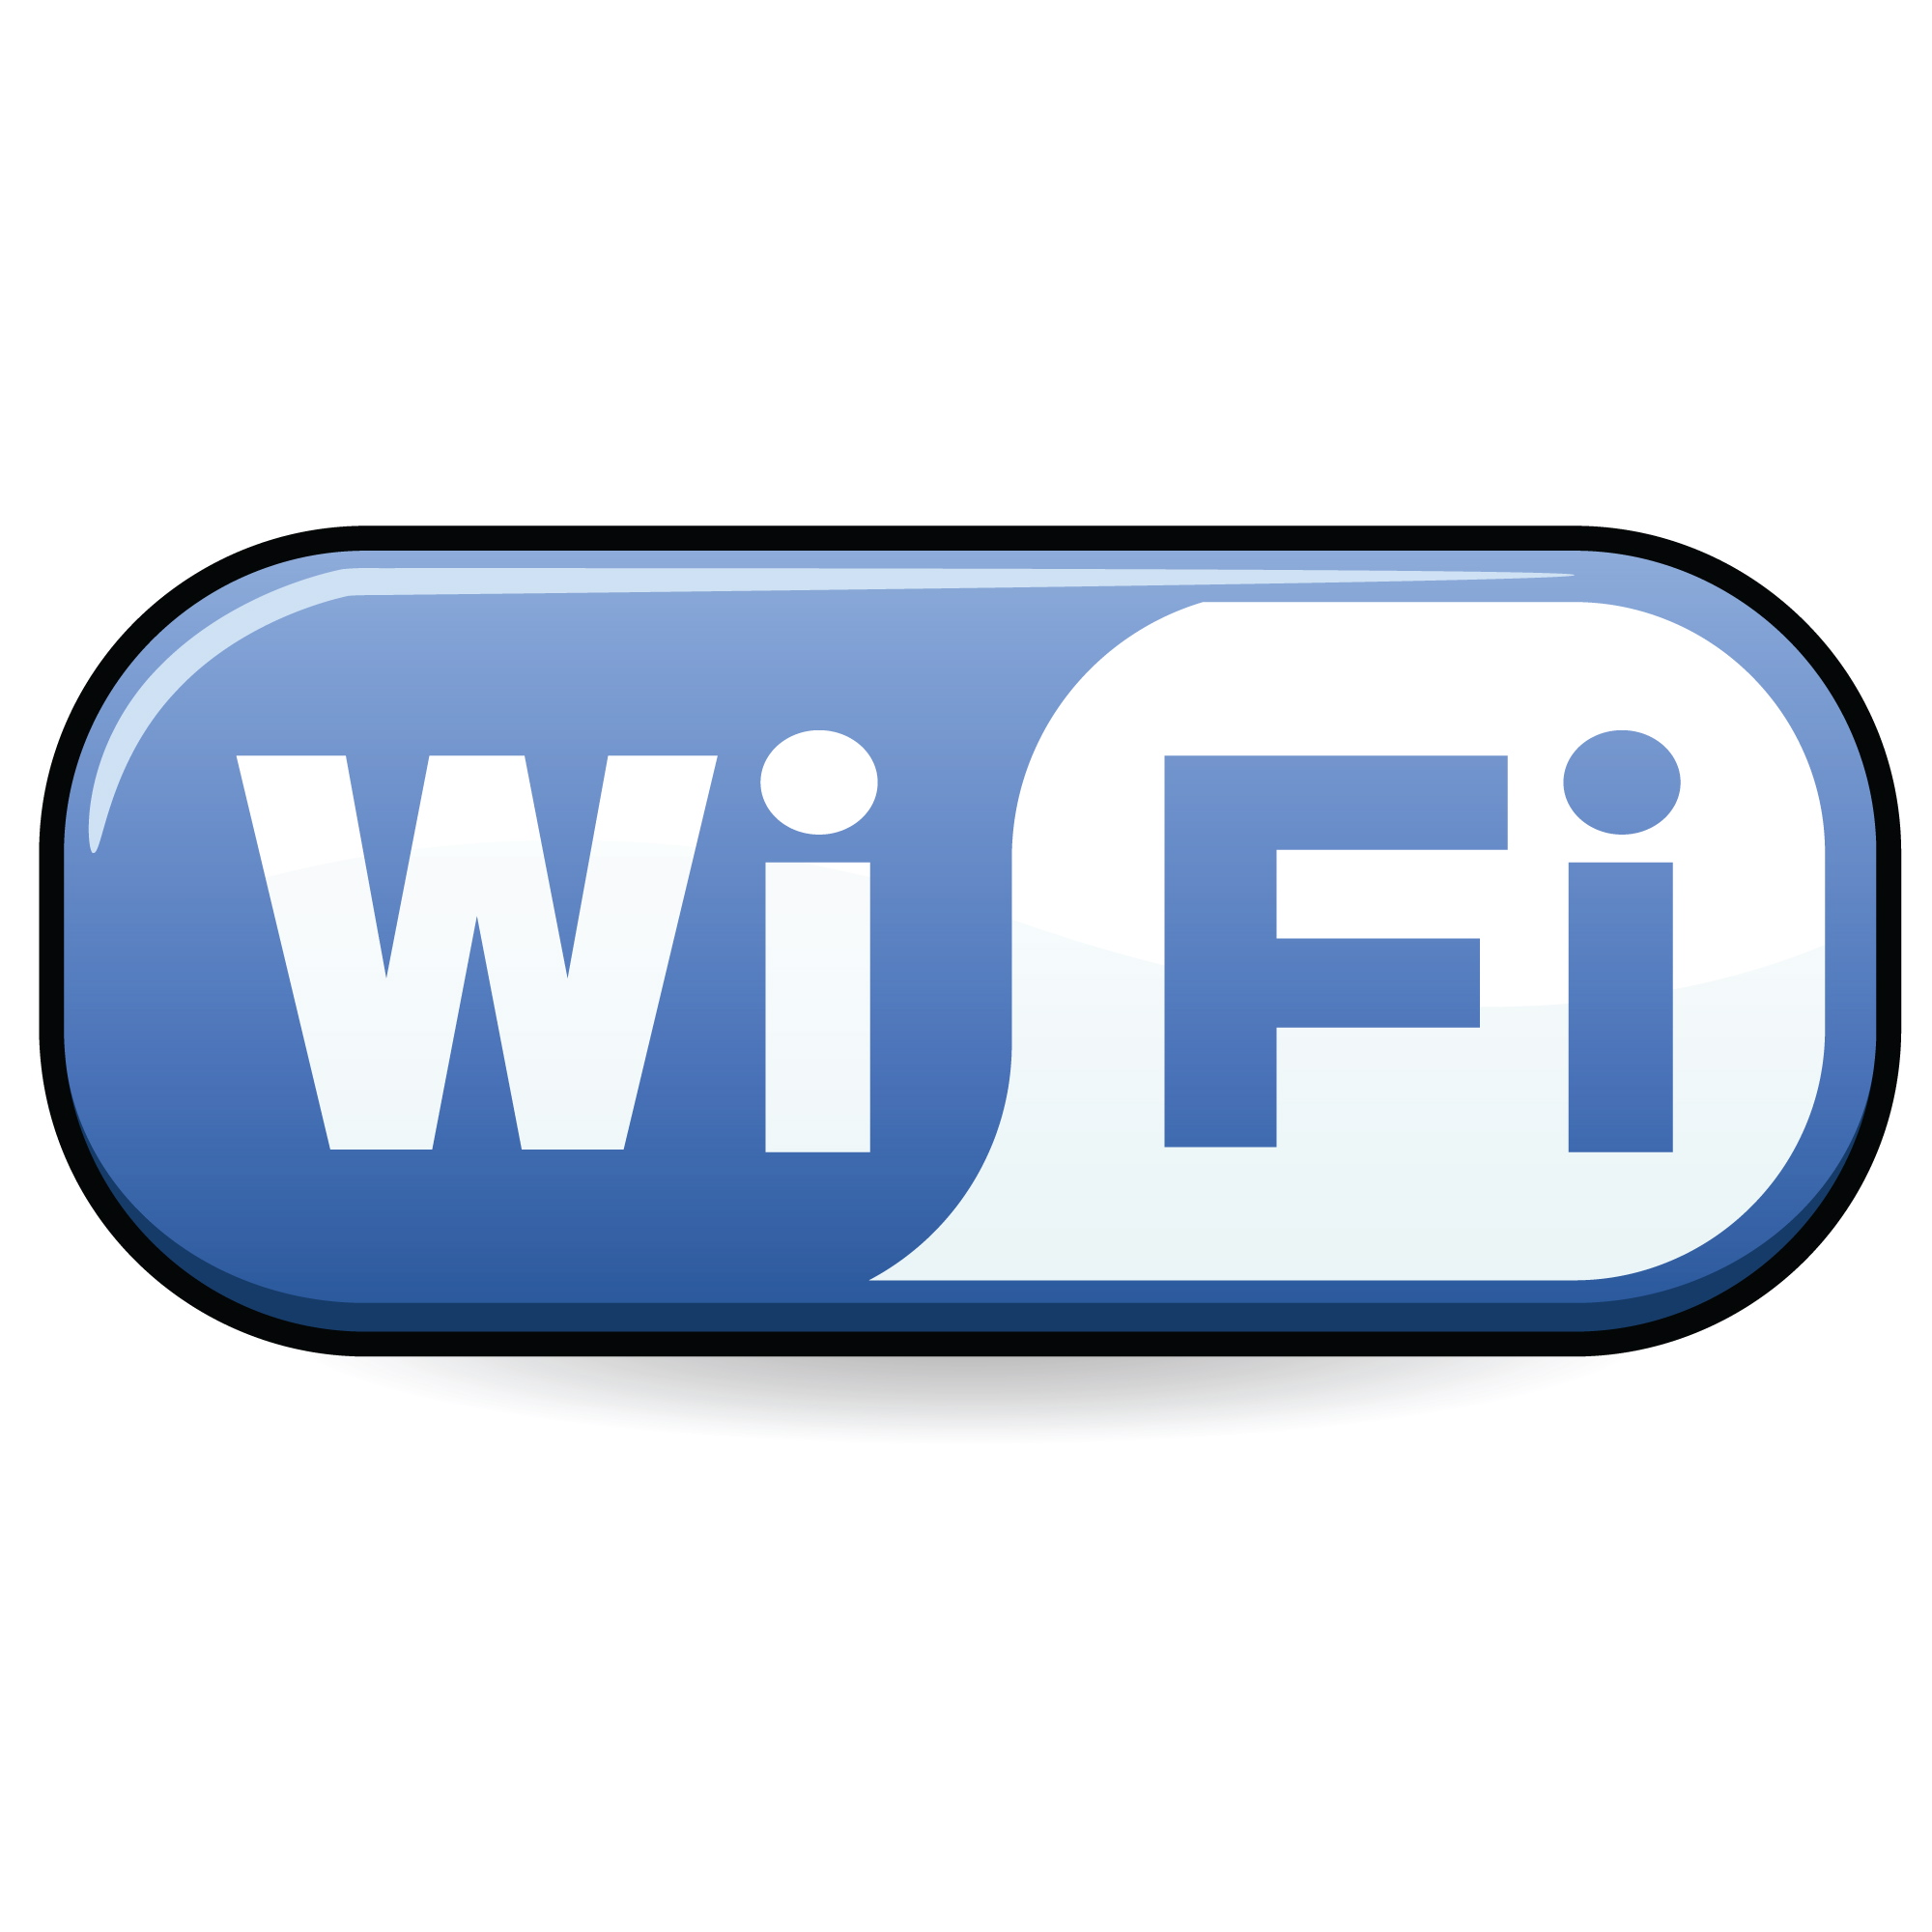 Wifi Symbol Vector Free - ClipArt Best